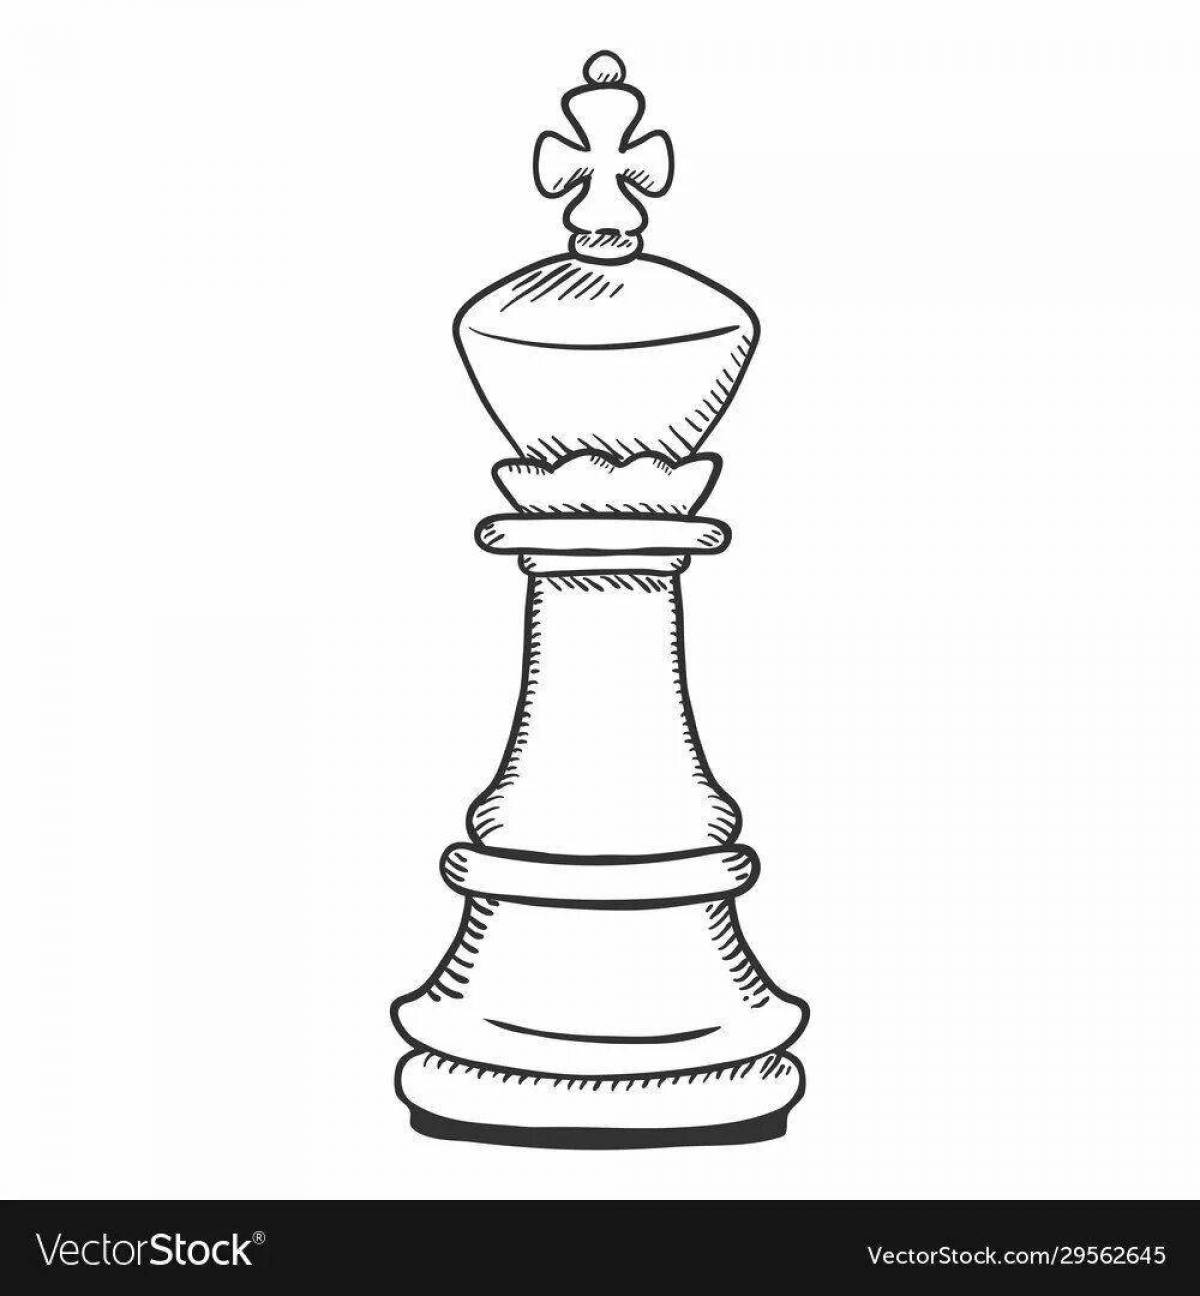 Awesome chess coloring pages